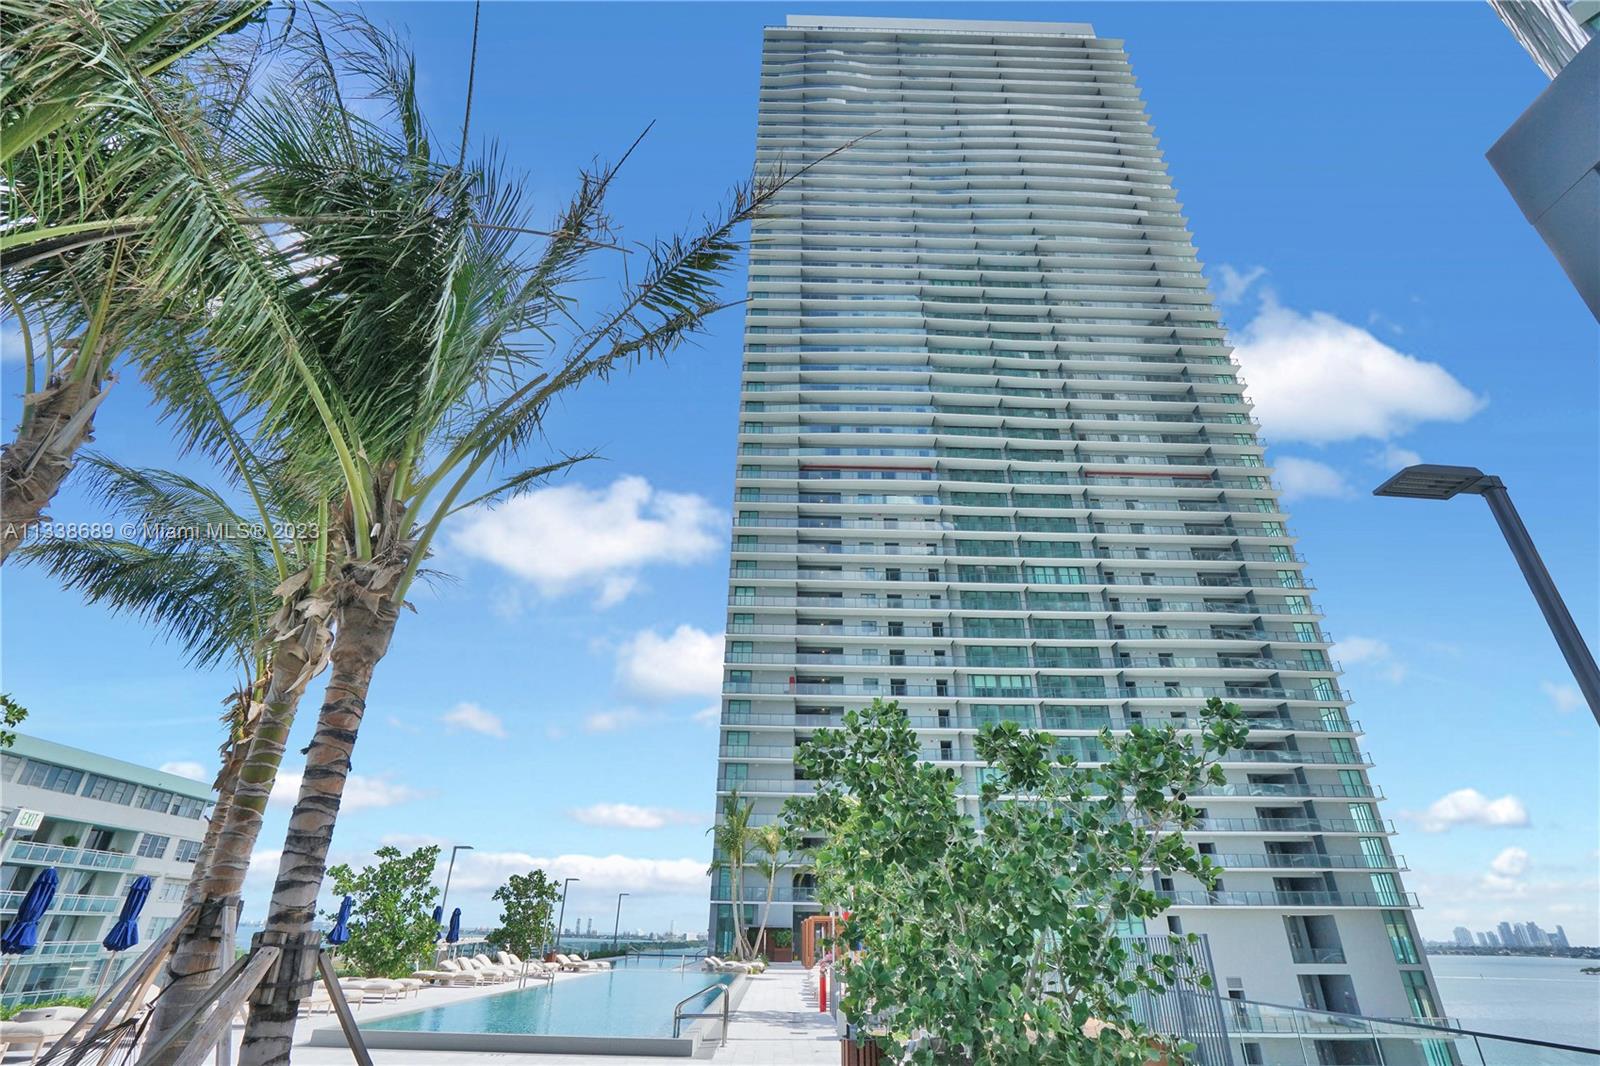 One Paraiso, a 53 story highrise luxury condo in the Heart of Edgewater